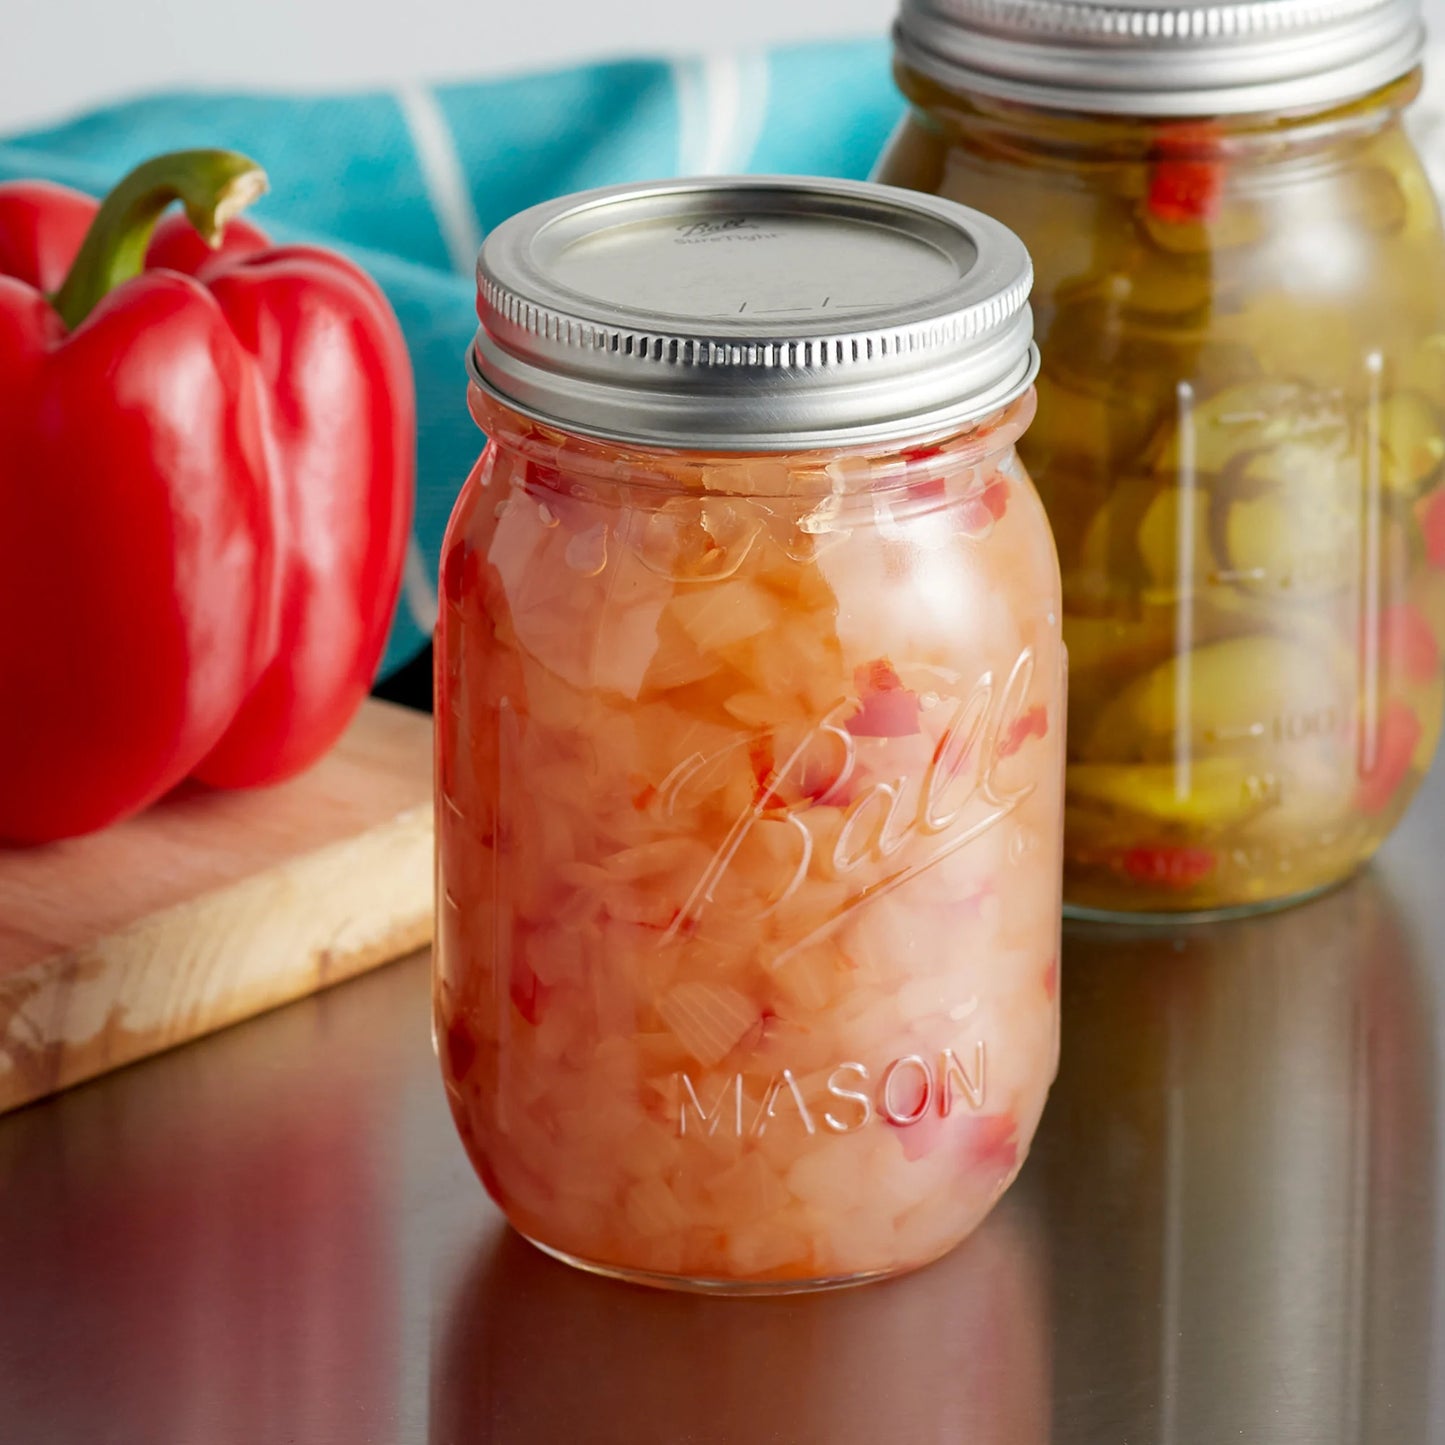 A duo of Ball jars packed with pickled vegetables on a kitchen surface